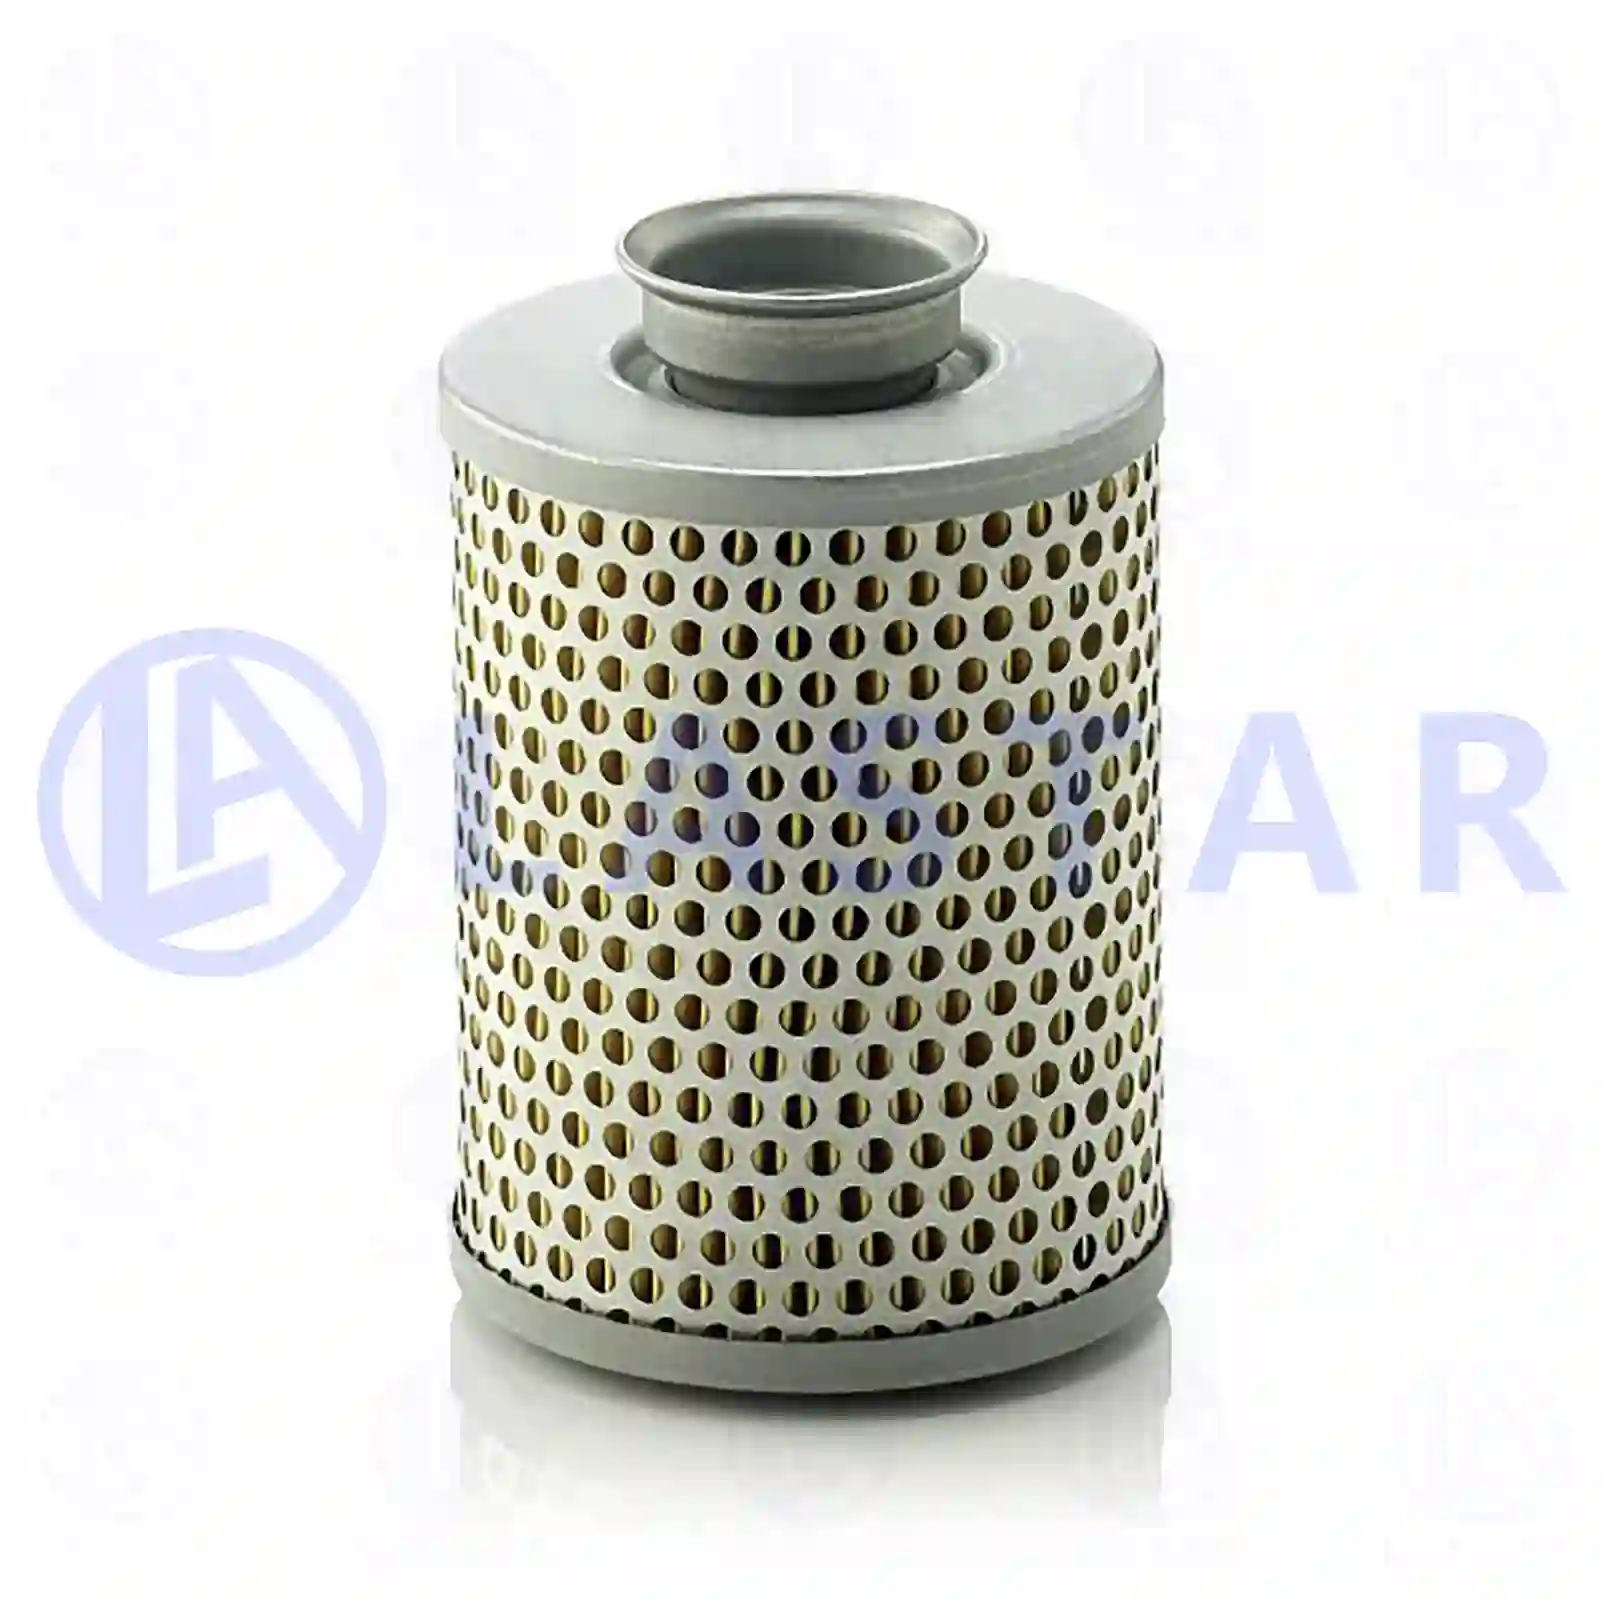 Oil Container, Steering Oil filter insert, la no: 77704975 ,  oem no:00507826, 00565955, 00641276, 00641285, 00782301, 00782318, 00908251, 4398149, 4502498, 4502499, 45024994, 74502499, 74734248, B2499, B4844, ZE67267000, 33710530209, 0713069901, 0713069902, 711224U, 7633141101, 807200756, 011541, 018152AB, 08152AB, 08926AB, 10017, A27302, VT3427, 9Y-4499, 1121689, 1121694, 1123151, 1123152, 1403695, 1405639, 1685241, 1711791, 1711971, 1723382, 1733882, 1821552, 200136, 302496, 3113311, 3990068, 645635, 645638, 646535, 647519, 6473475, 649421, 654638, 731125, 808042, 852758, 861032, 8990041, 8990044, 8990068, 907630, 909335, 911208, HA302494, HA302496, J0302496, J0647345, J0909335, J3990068, J8990041, J8990068, SP302496, 0001334980, 0302043, 1500662, 302043, 474910, 47491000, 01267900, 01909104, 1111601953100, 605412920001, 7633141101, 87511382178, 37843, 1111601953100, 7633141101, 1190514, 1B1365, F284950030020, 01267900, 09912650, 72053001, 79912650, Y02549901, YO2549901, 5001748, 5001753, 5014391, 1420351, 5572499, 5572693, 5573444, 5574259, 5574470, 7984452, 1595109, 1595131, 1595509, 25012824, 5570003, 5570015, 5570148, 5570224, 5572509, 5572748, 5573444, 5574470, 5576049, 5970295, 7984861, 0001848525, 2941292M1, 773906234, 921488, 019467, 0228051, 00883834, 00912650, 01267900, 02992056, 09912650, 75174, 01267900, 87511382178, 0003634631, 1267900, L976, 7594031901, 09912650, 72053001, 07633141101, 51055040007, 81055040007, 81055040051, 81055046001, 81473010002, 81473070001, 82055046001, 90807200756, 1014219, 1014290, 1086925, 1121694, 1324428, 1502470, 1509106, 1600011, 1712580, 1750581, 1750588, 1752177, 184522, 1900371, 2914292M1, 2941291M1, 2941292M1, 3144305M1, 620121, 620125, 620300, 620304, 620310, 620314, 623941, 624548, 624549, 642547, 642548, 642549, 671018, 671163M91, 671763, 826147, 830910, 835817, 840293M91, 840751M91, 841241M91, 841244, 81055040007, 0000940004, 0001800209, 0001848525, 0004660004, 0004660006, 6274660004, 8225007022, 605412920001, 1220037, 1220210, 122323, 12237, 1490764, 15434A, 85010, 350571, F350571, G0350571, 546078271, 0003563604, 0403316240, 0500255463, 0500255643, 4033162440, 5000255463, 5000255643, 6005019556, 00002005216, 1327488, 134419, 168185, 205727S1, 7633141101, 8225007022, 295470705, 1685242, 197482, 341722, 395436ND, 395488, 519836, 520829, PA351405, 9921008600, 98067, 98072, 98092, 323139, 3231396, 3231596, 40151102, 6234582, 807200755, 0117980, 101687, 117980B, 203592, 32101, 509026, 5272, 960294, A117980B, UP203592, 5818, 645636, 0010724303, ZG03045-0008 Lastar Spare Part | Truck Spare Parts, Auotomotive Spare Parts